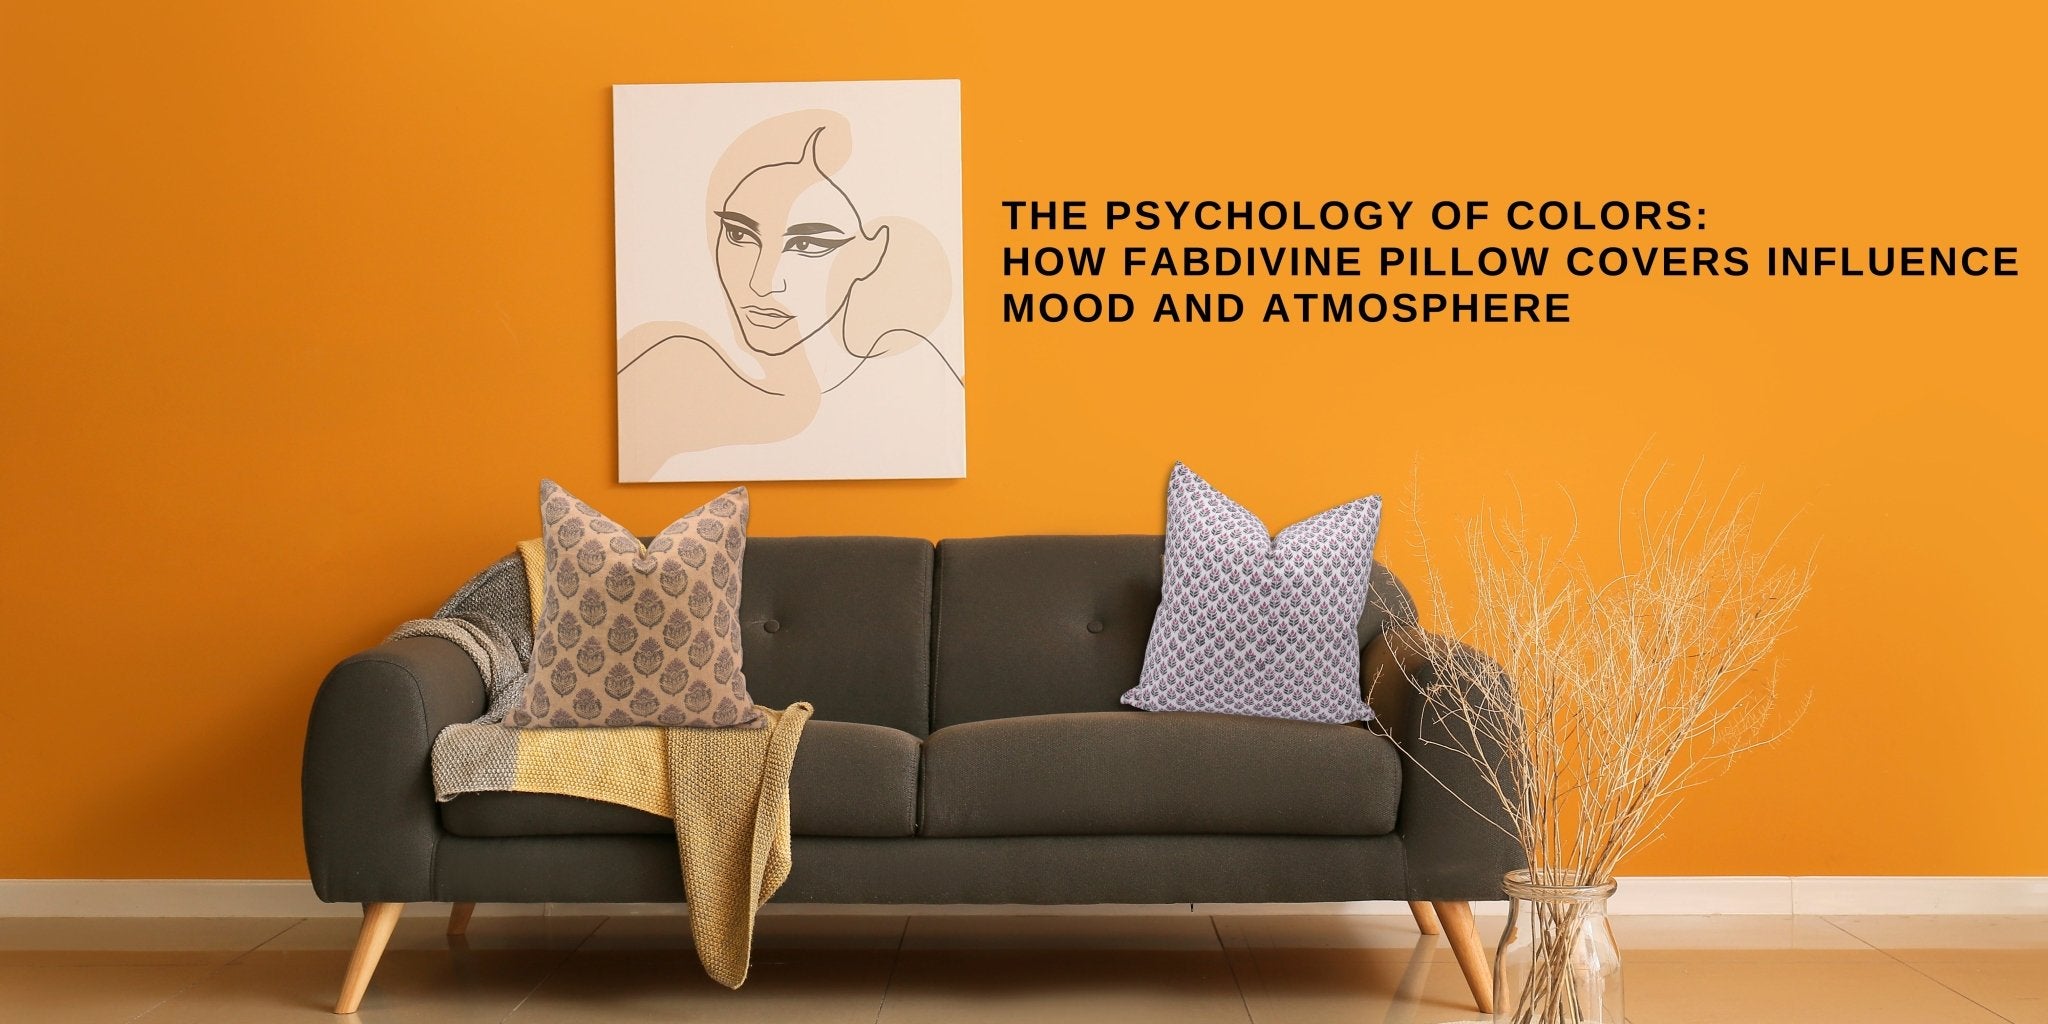 The Psychology of Colors: How Fabdivine Pillow Covers Influence Mood and Atmosphere - FABDIVINE LLC